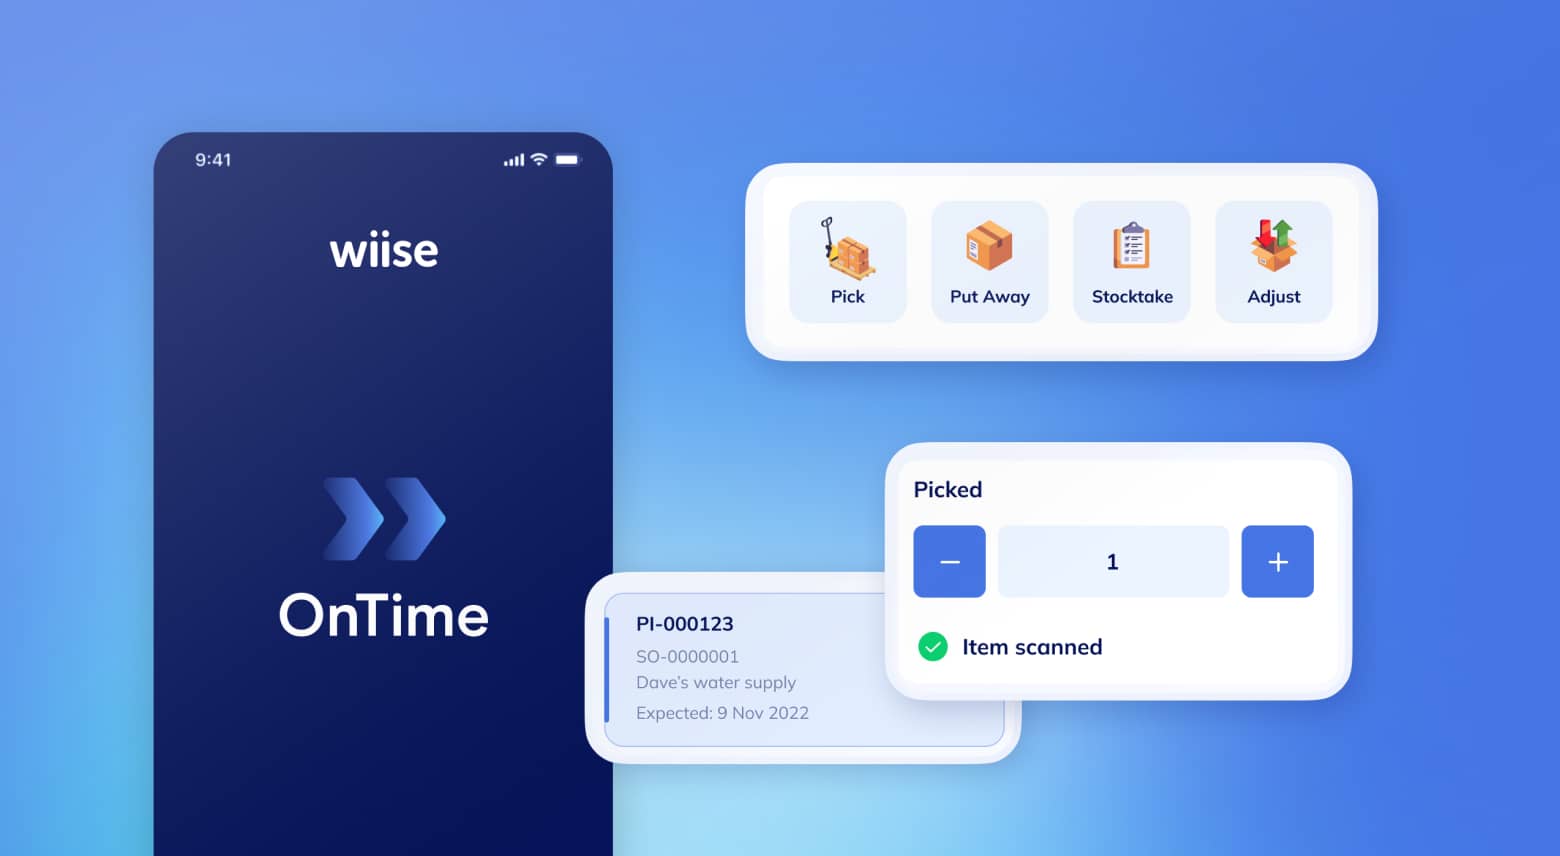 The Wiise Ontime app with screenshots of the app and it's functions